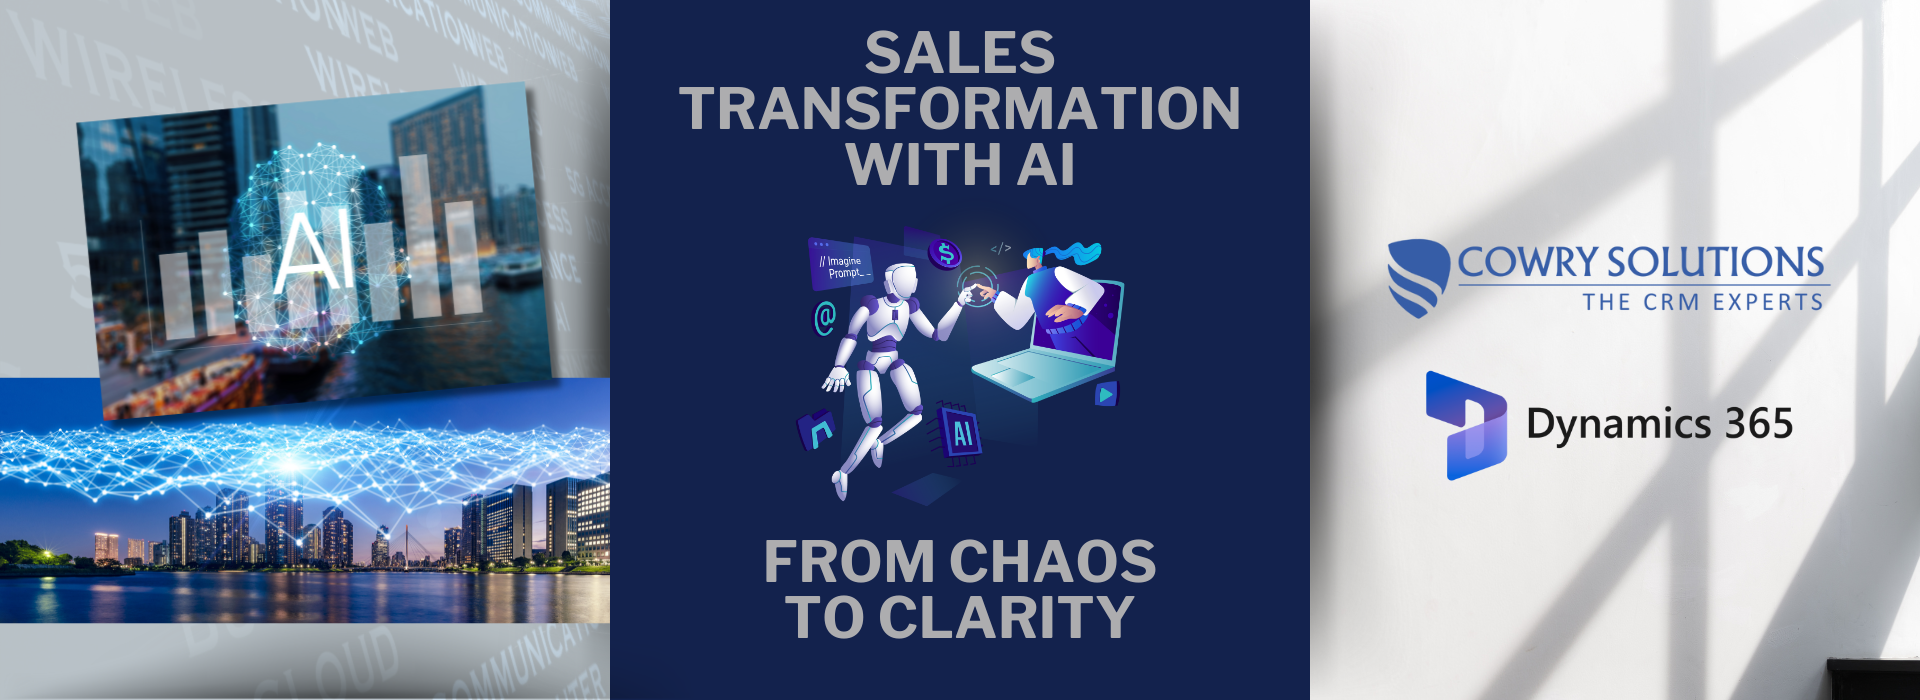 Sales Transformation with AI: From Chaos to Clarity